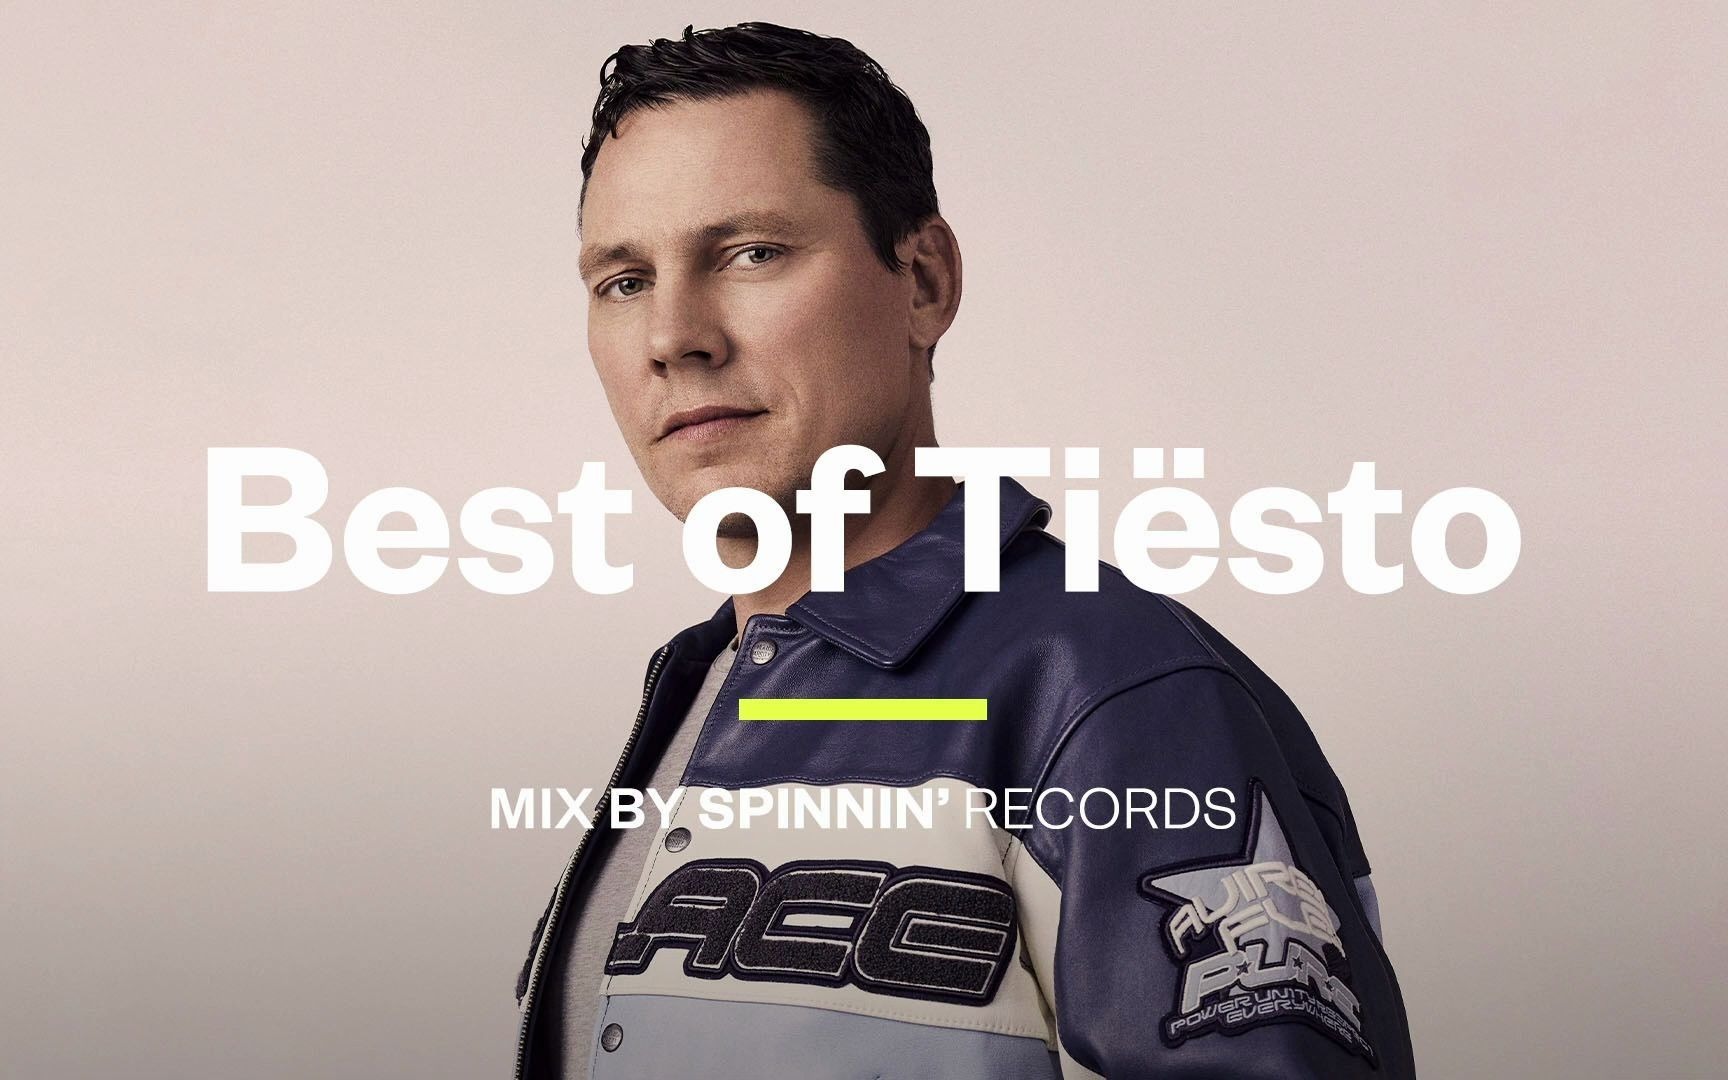 Best of Tiësto MIX BY Spinnin' Records